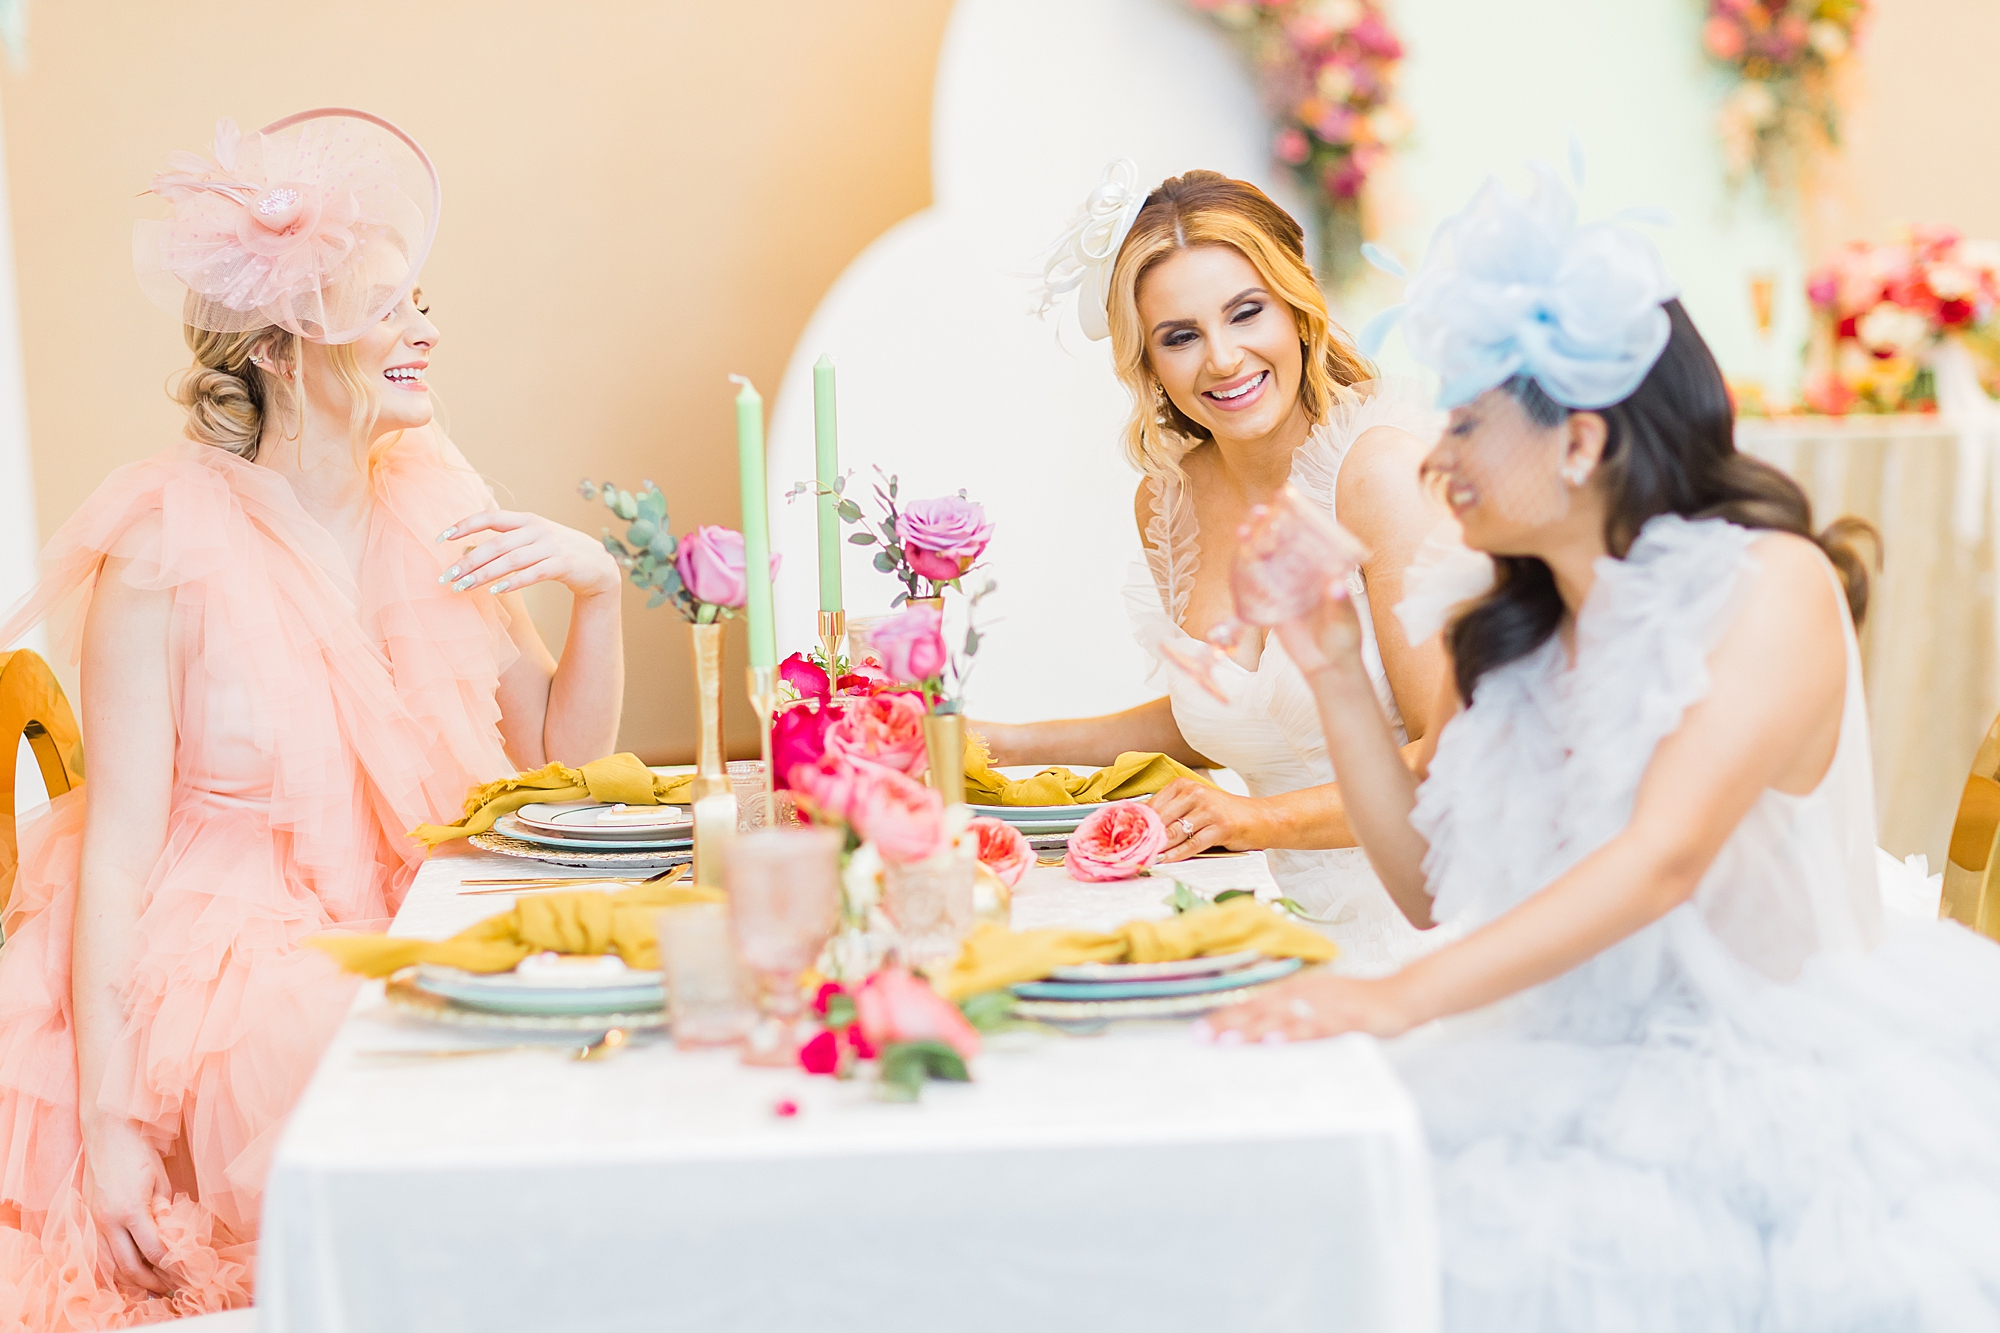 women laugh during wedding reception inspired by Kentucky derby